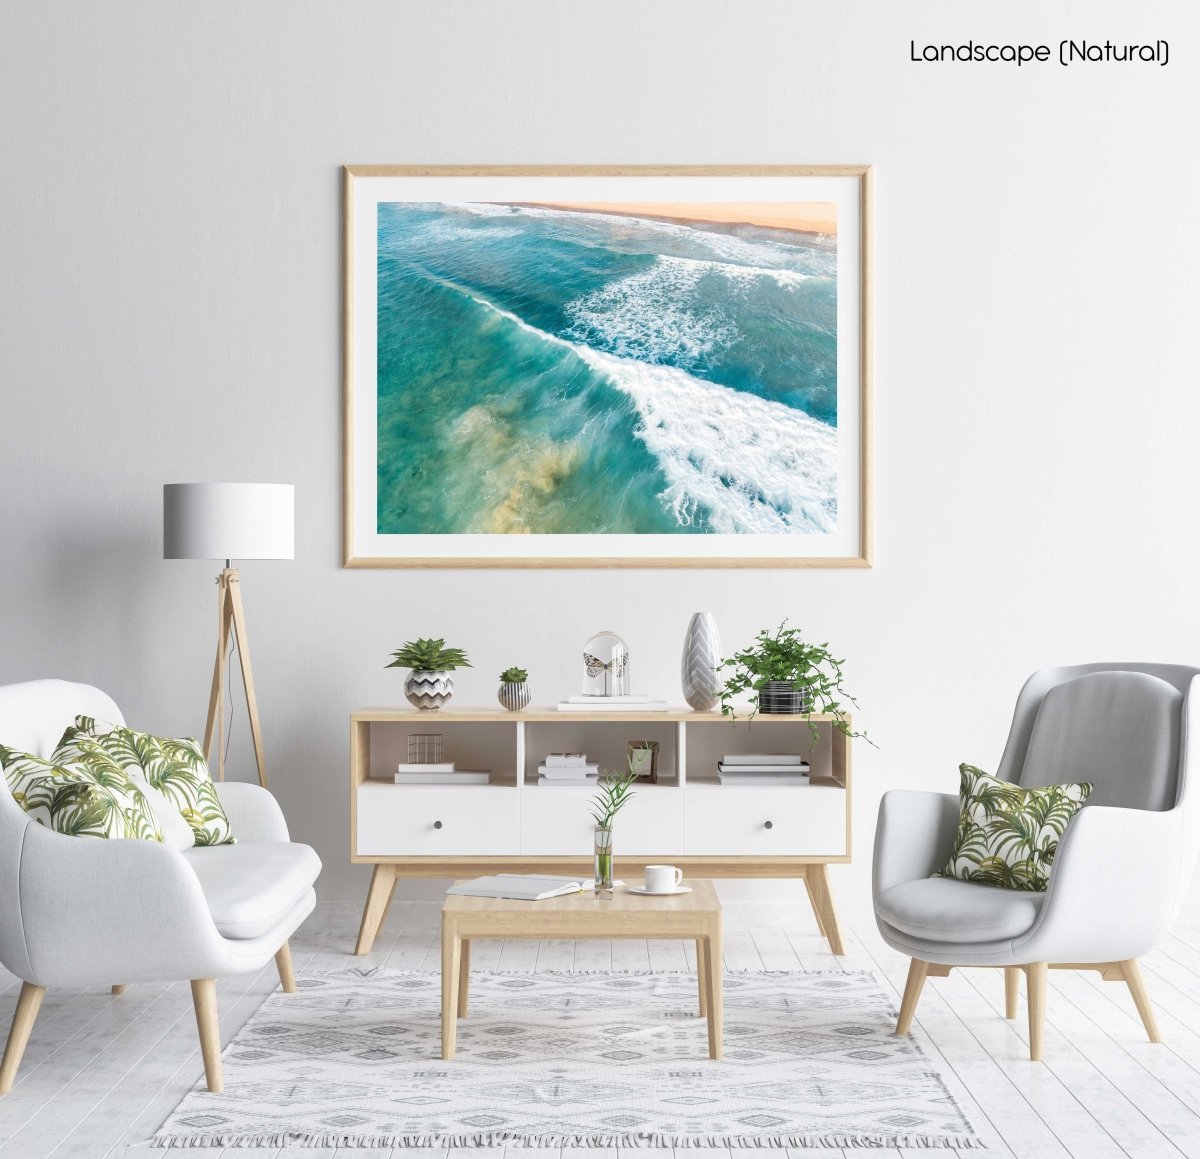 Wave whitewash from behind at Manly Beach Sydney in a natural fine art frame